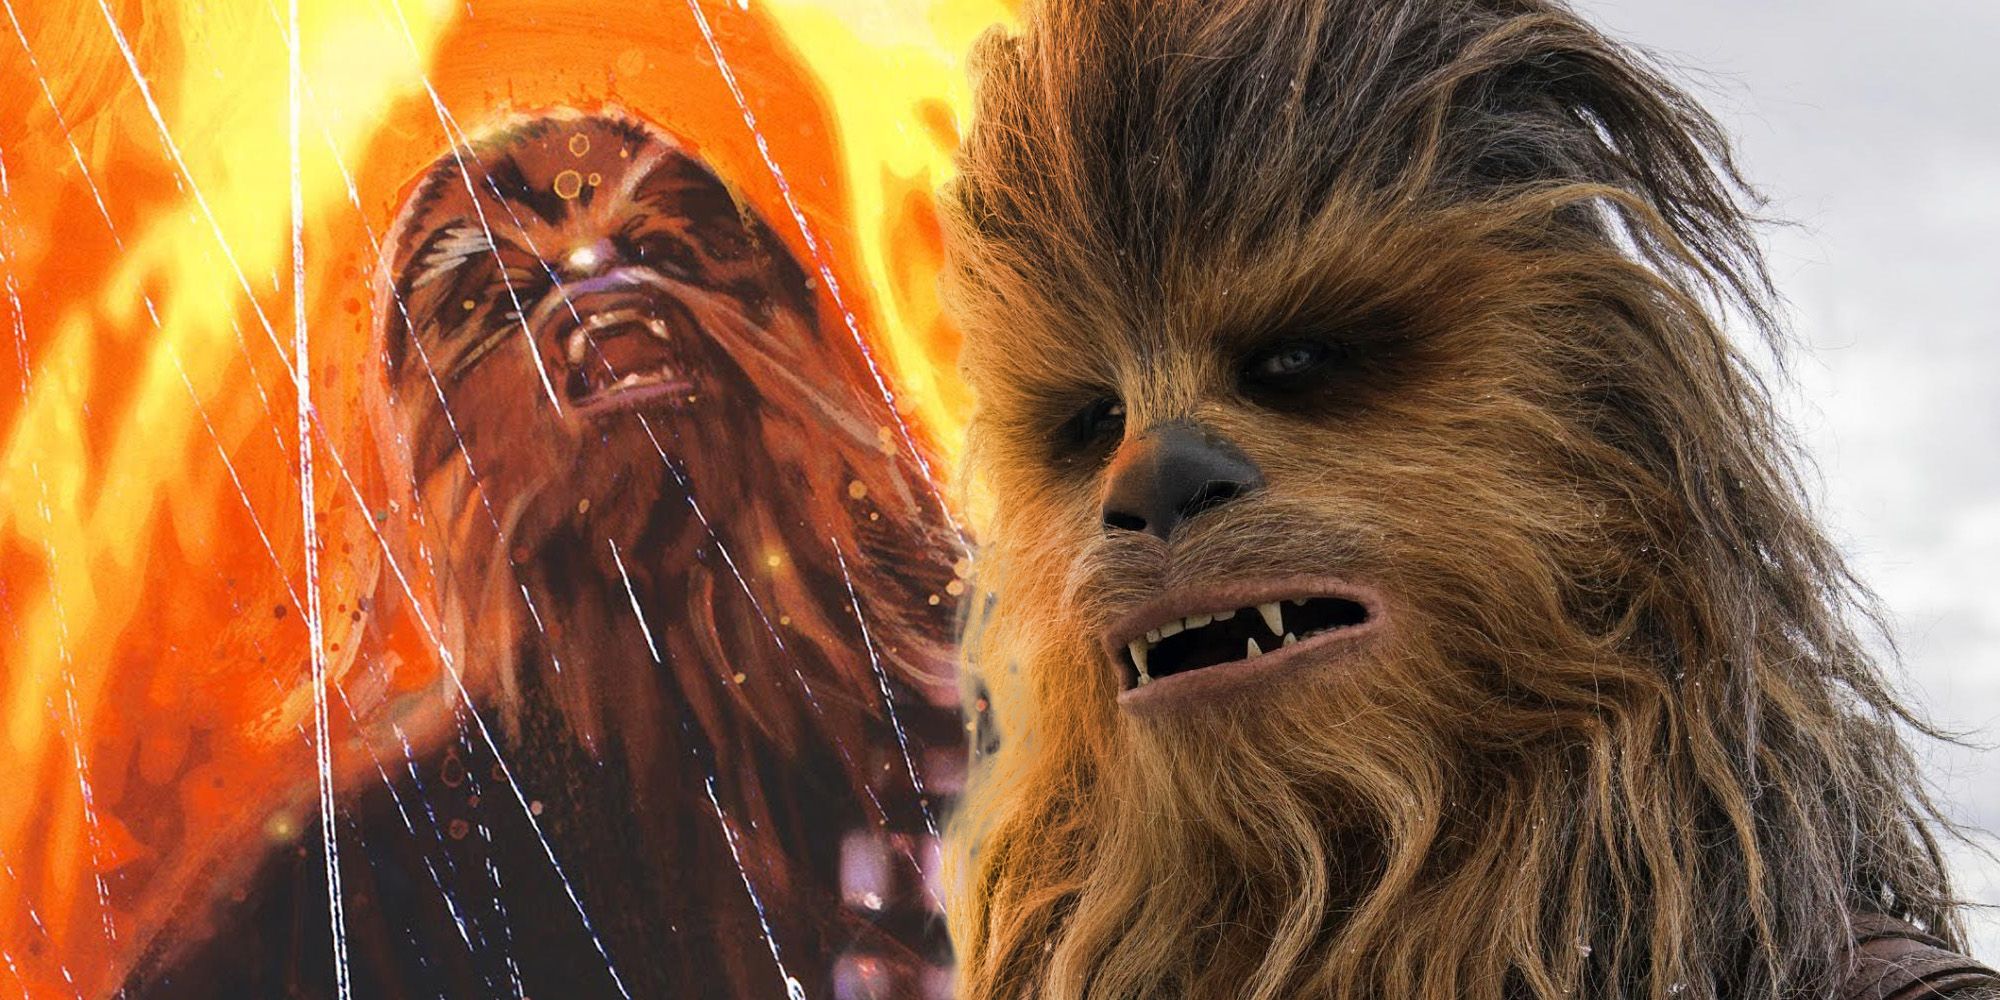 We’re So Glad Chewbacca’s Absurd Death Isn’t Star Wars Canon Anymore